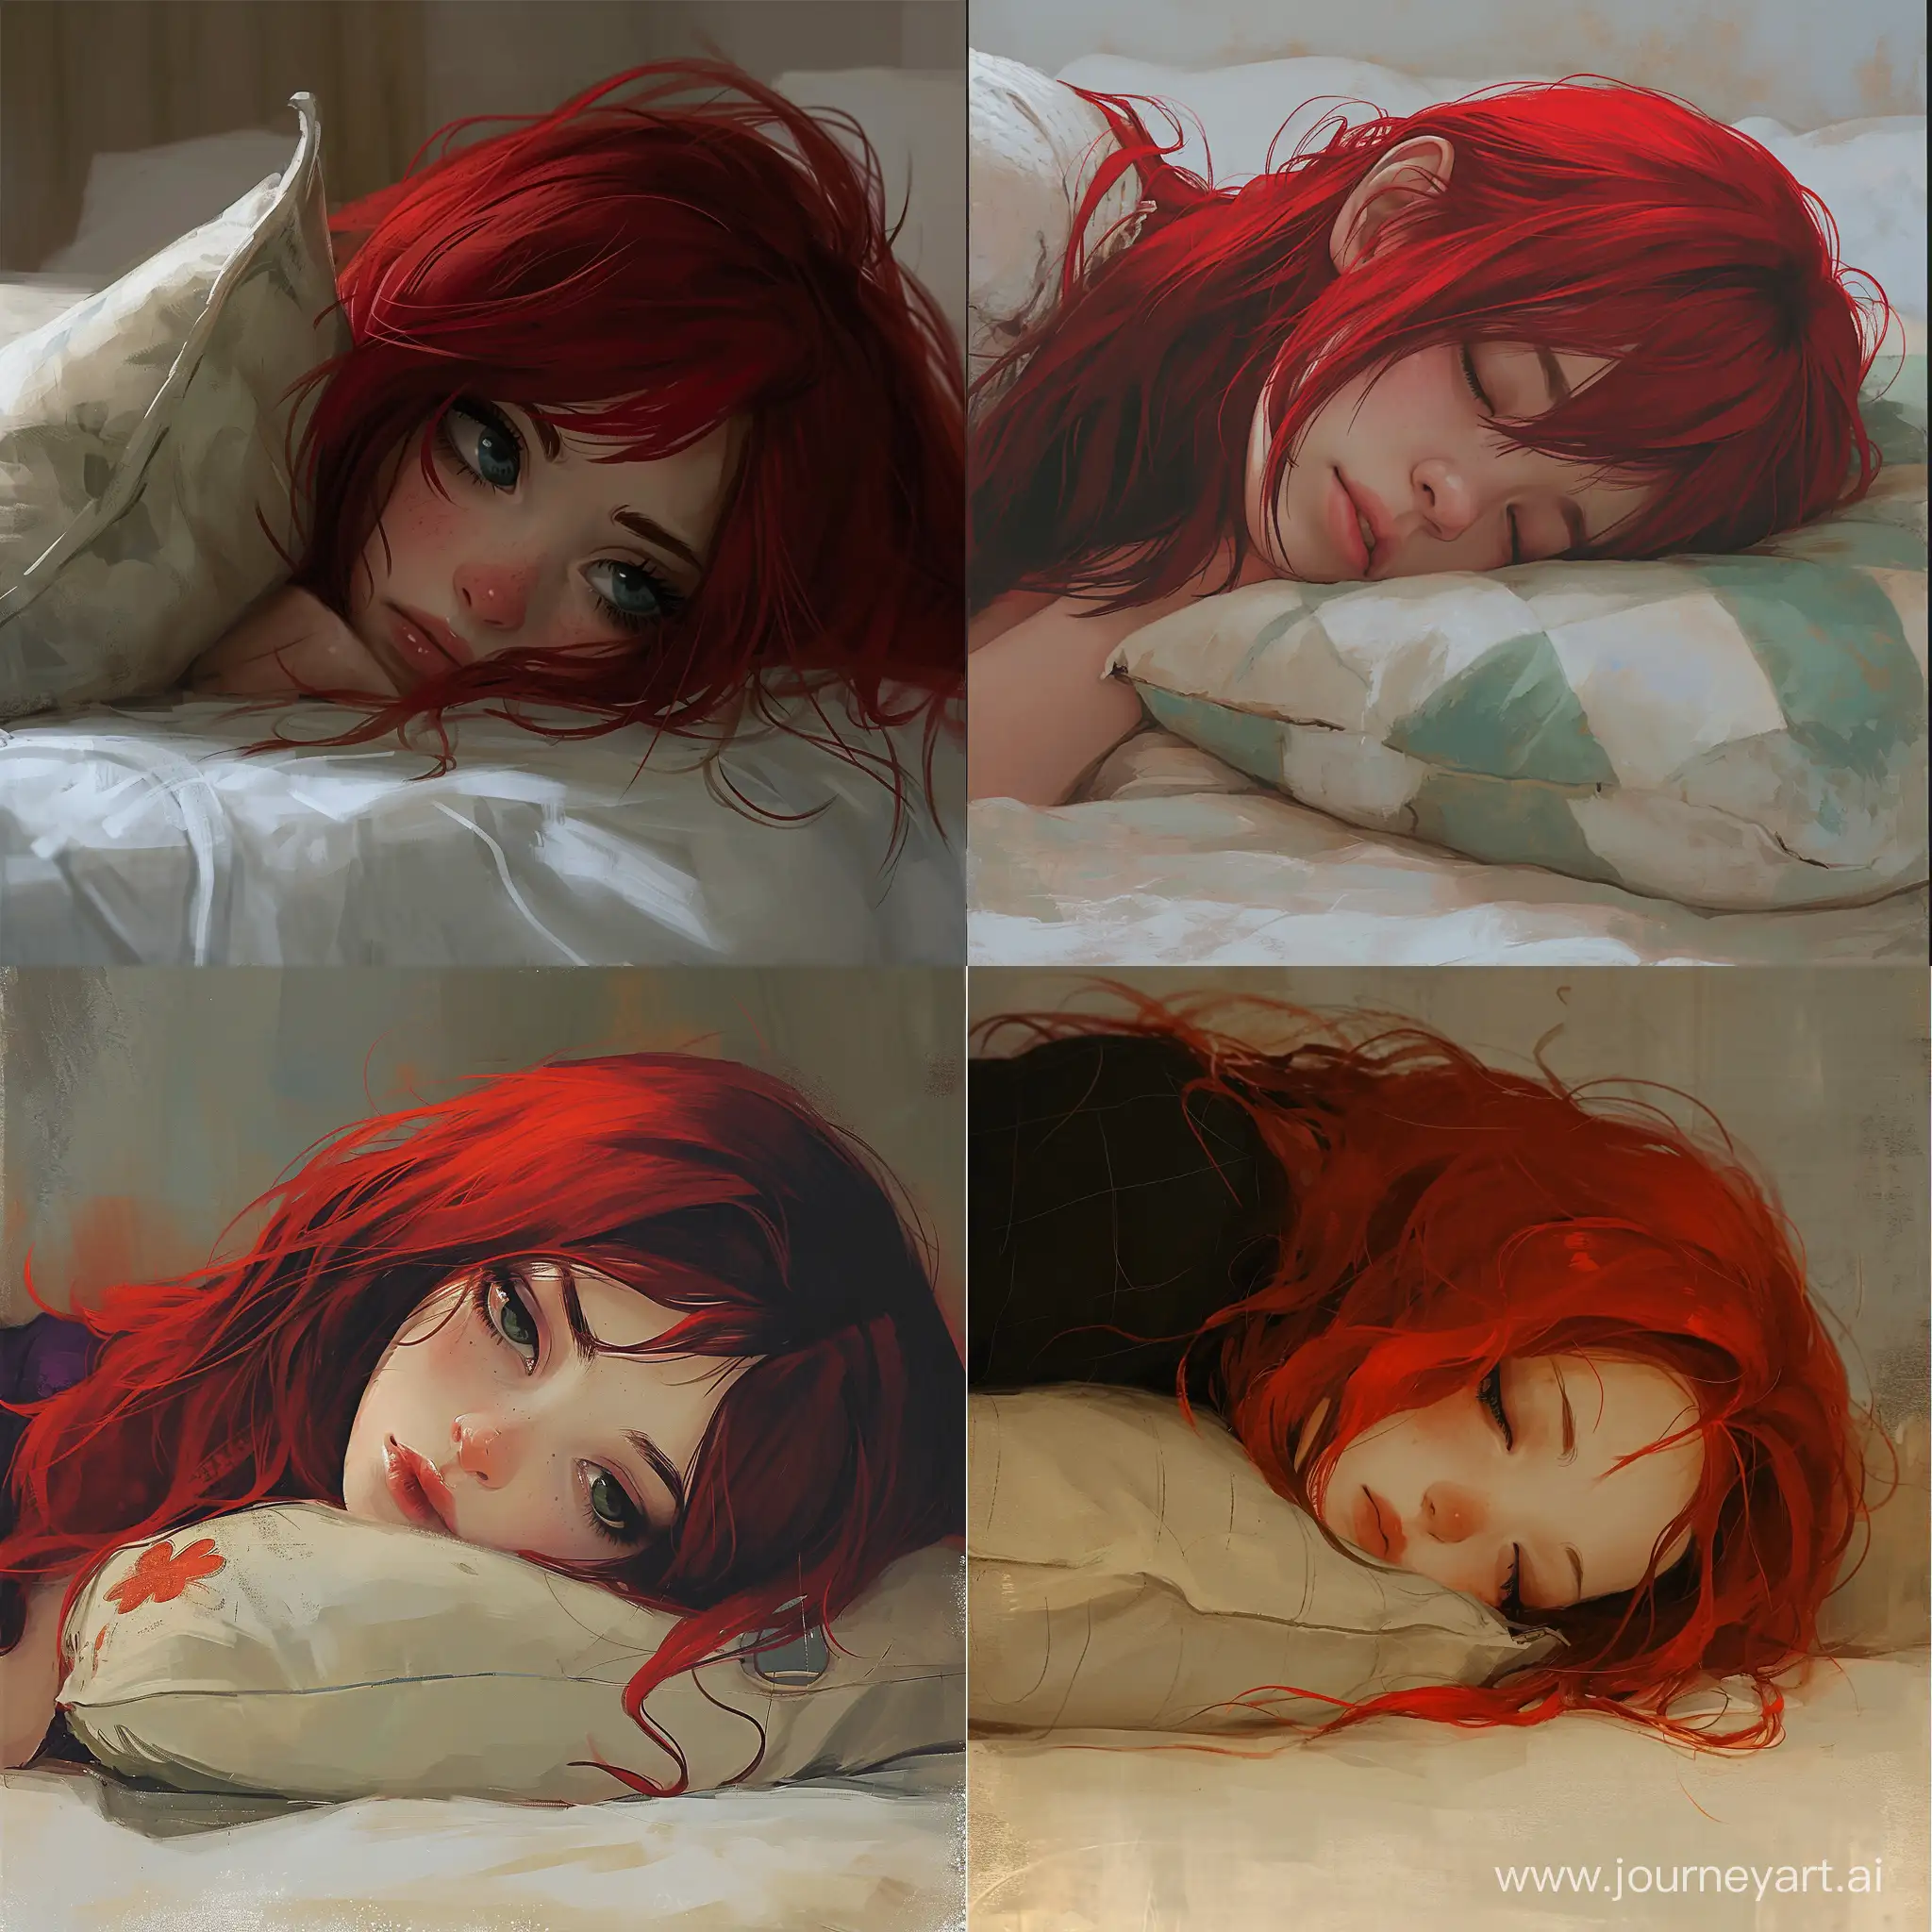 Close-up of the girl lying on the bed, her red hair spread out around her face. The pillow she holds tightly against her chest accentuates the atmosphere of longing and sorrow.